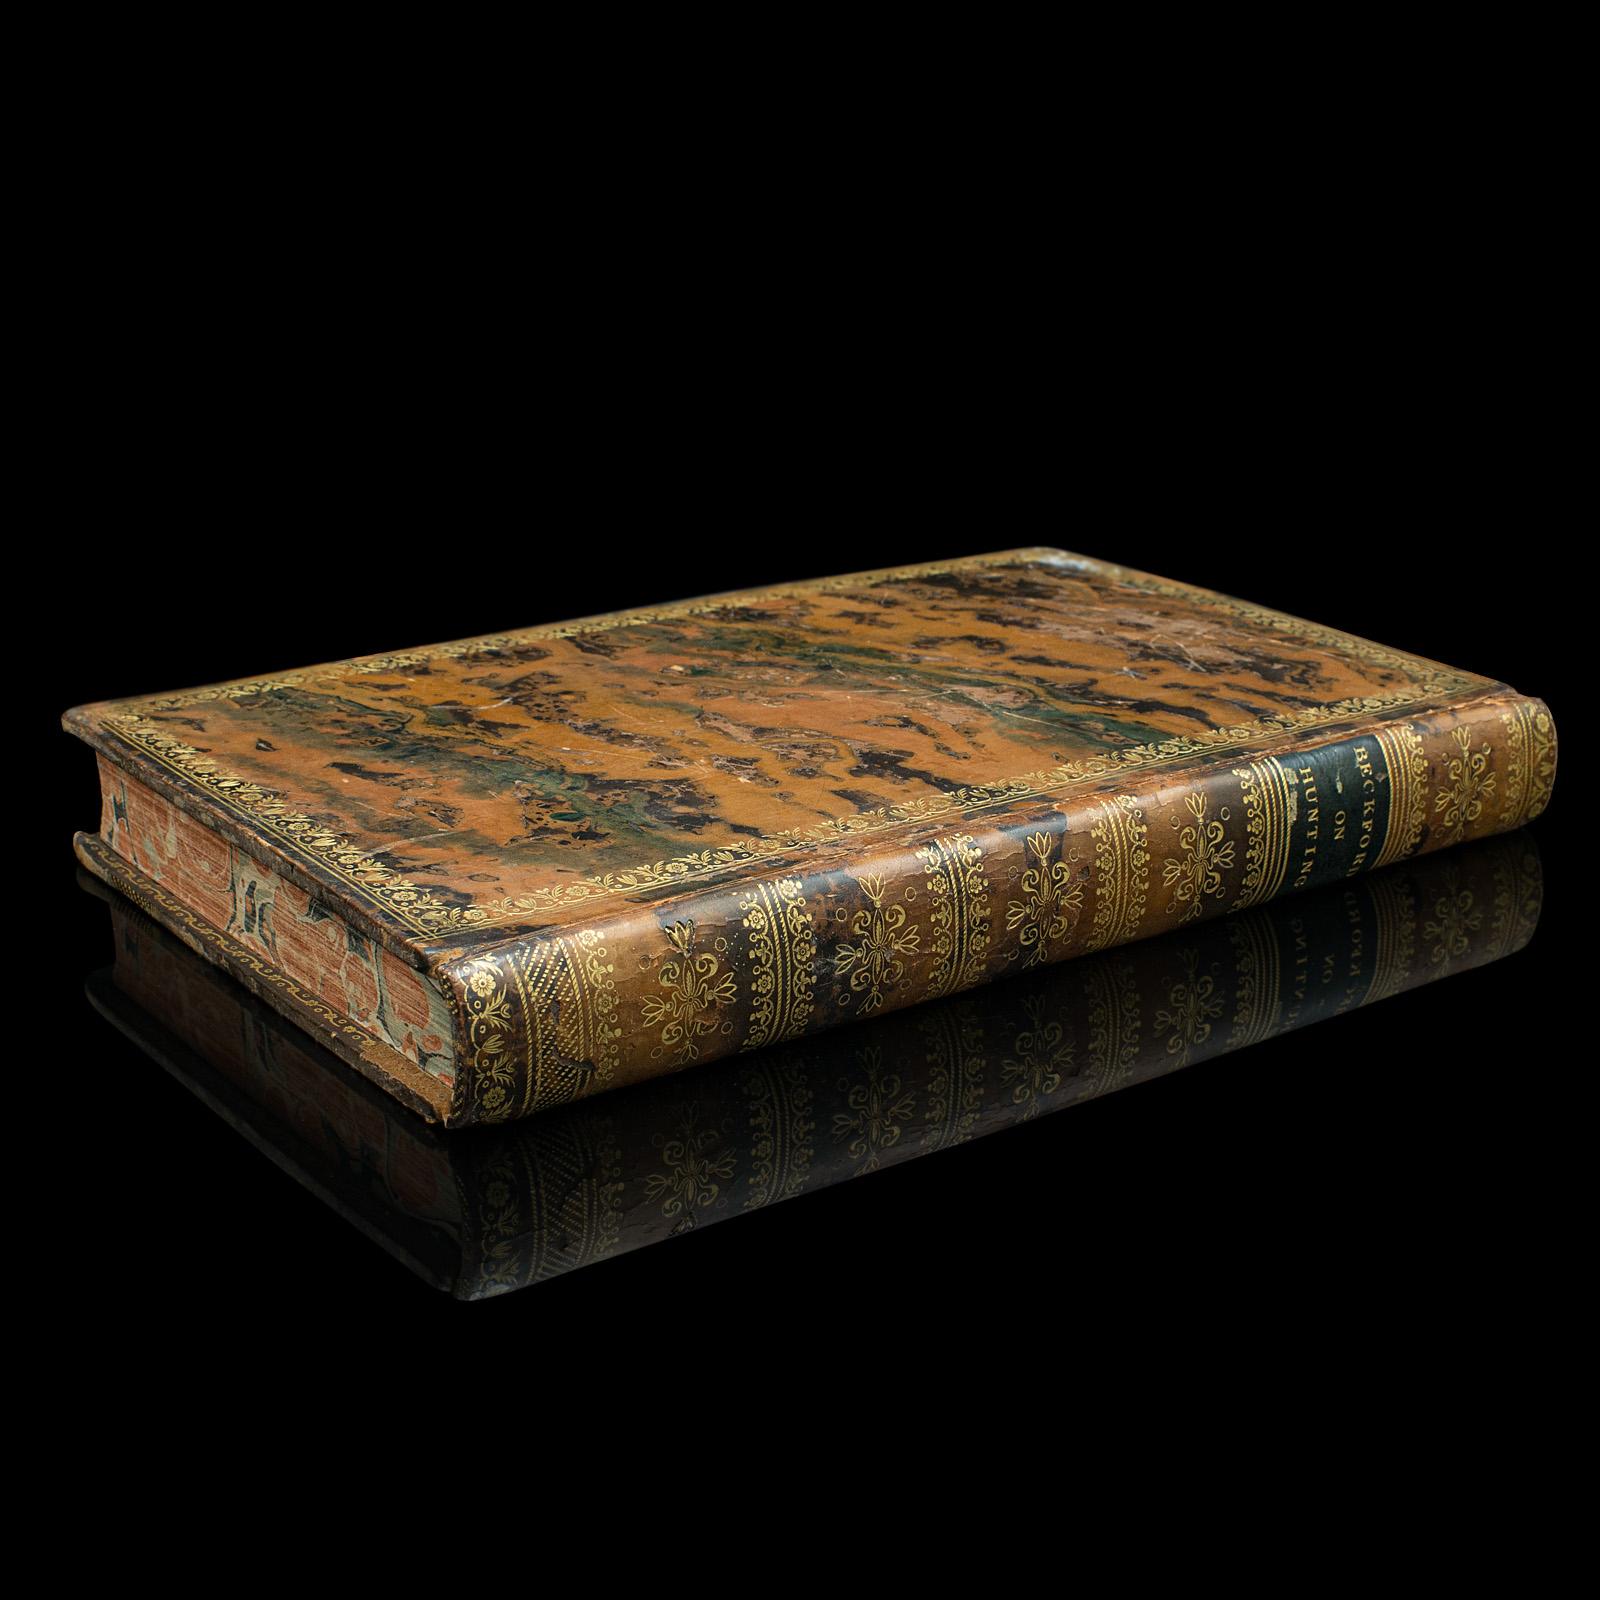 This is an antique book, Thoughts on Hunting by William Beckford. An English language hard bound compendium of sporting letters, dating to the Georgian period, published 1810.

An English novelist and art critic, William Beckford (1760 - 1844) was